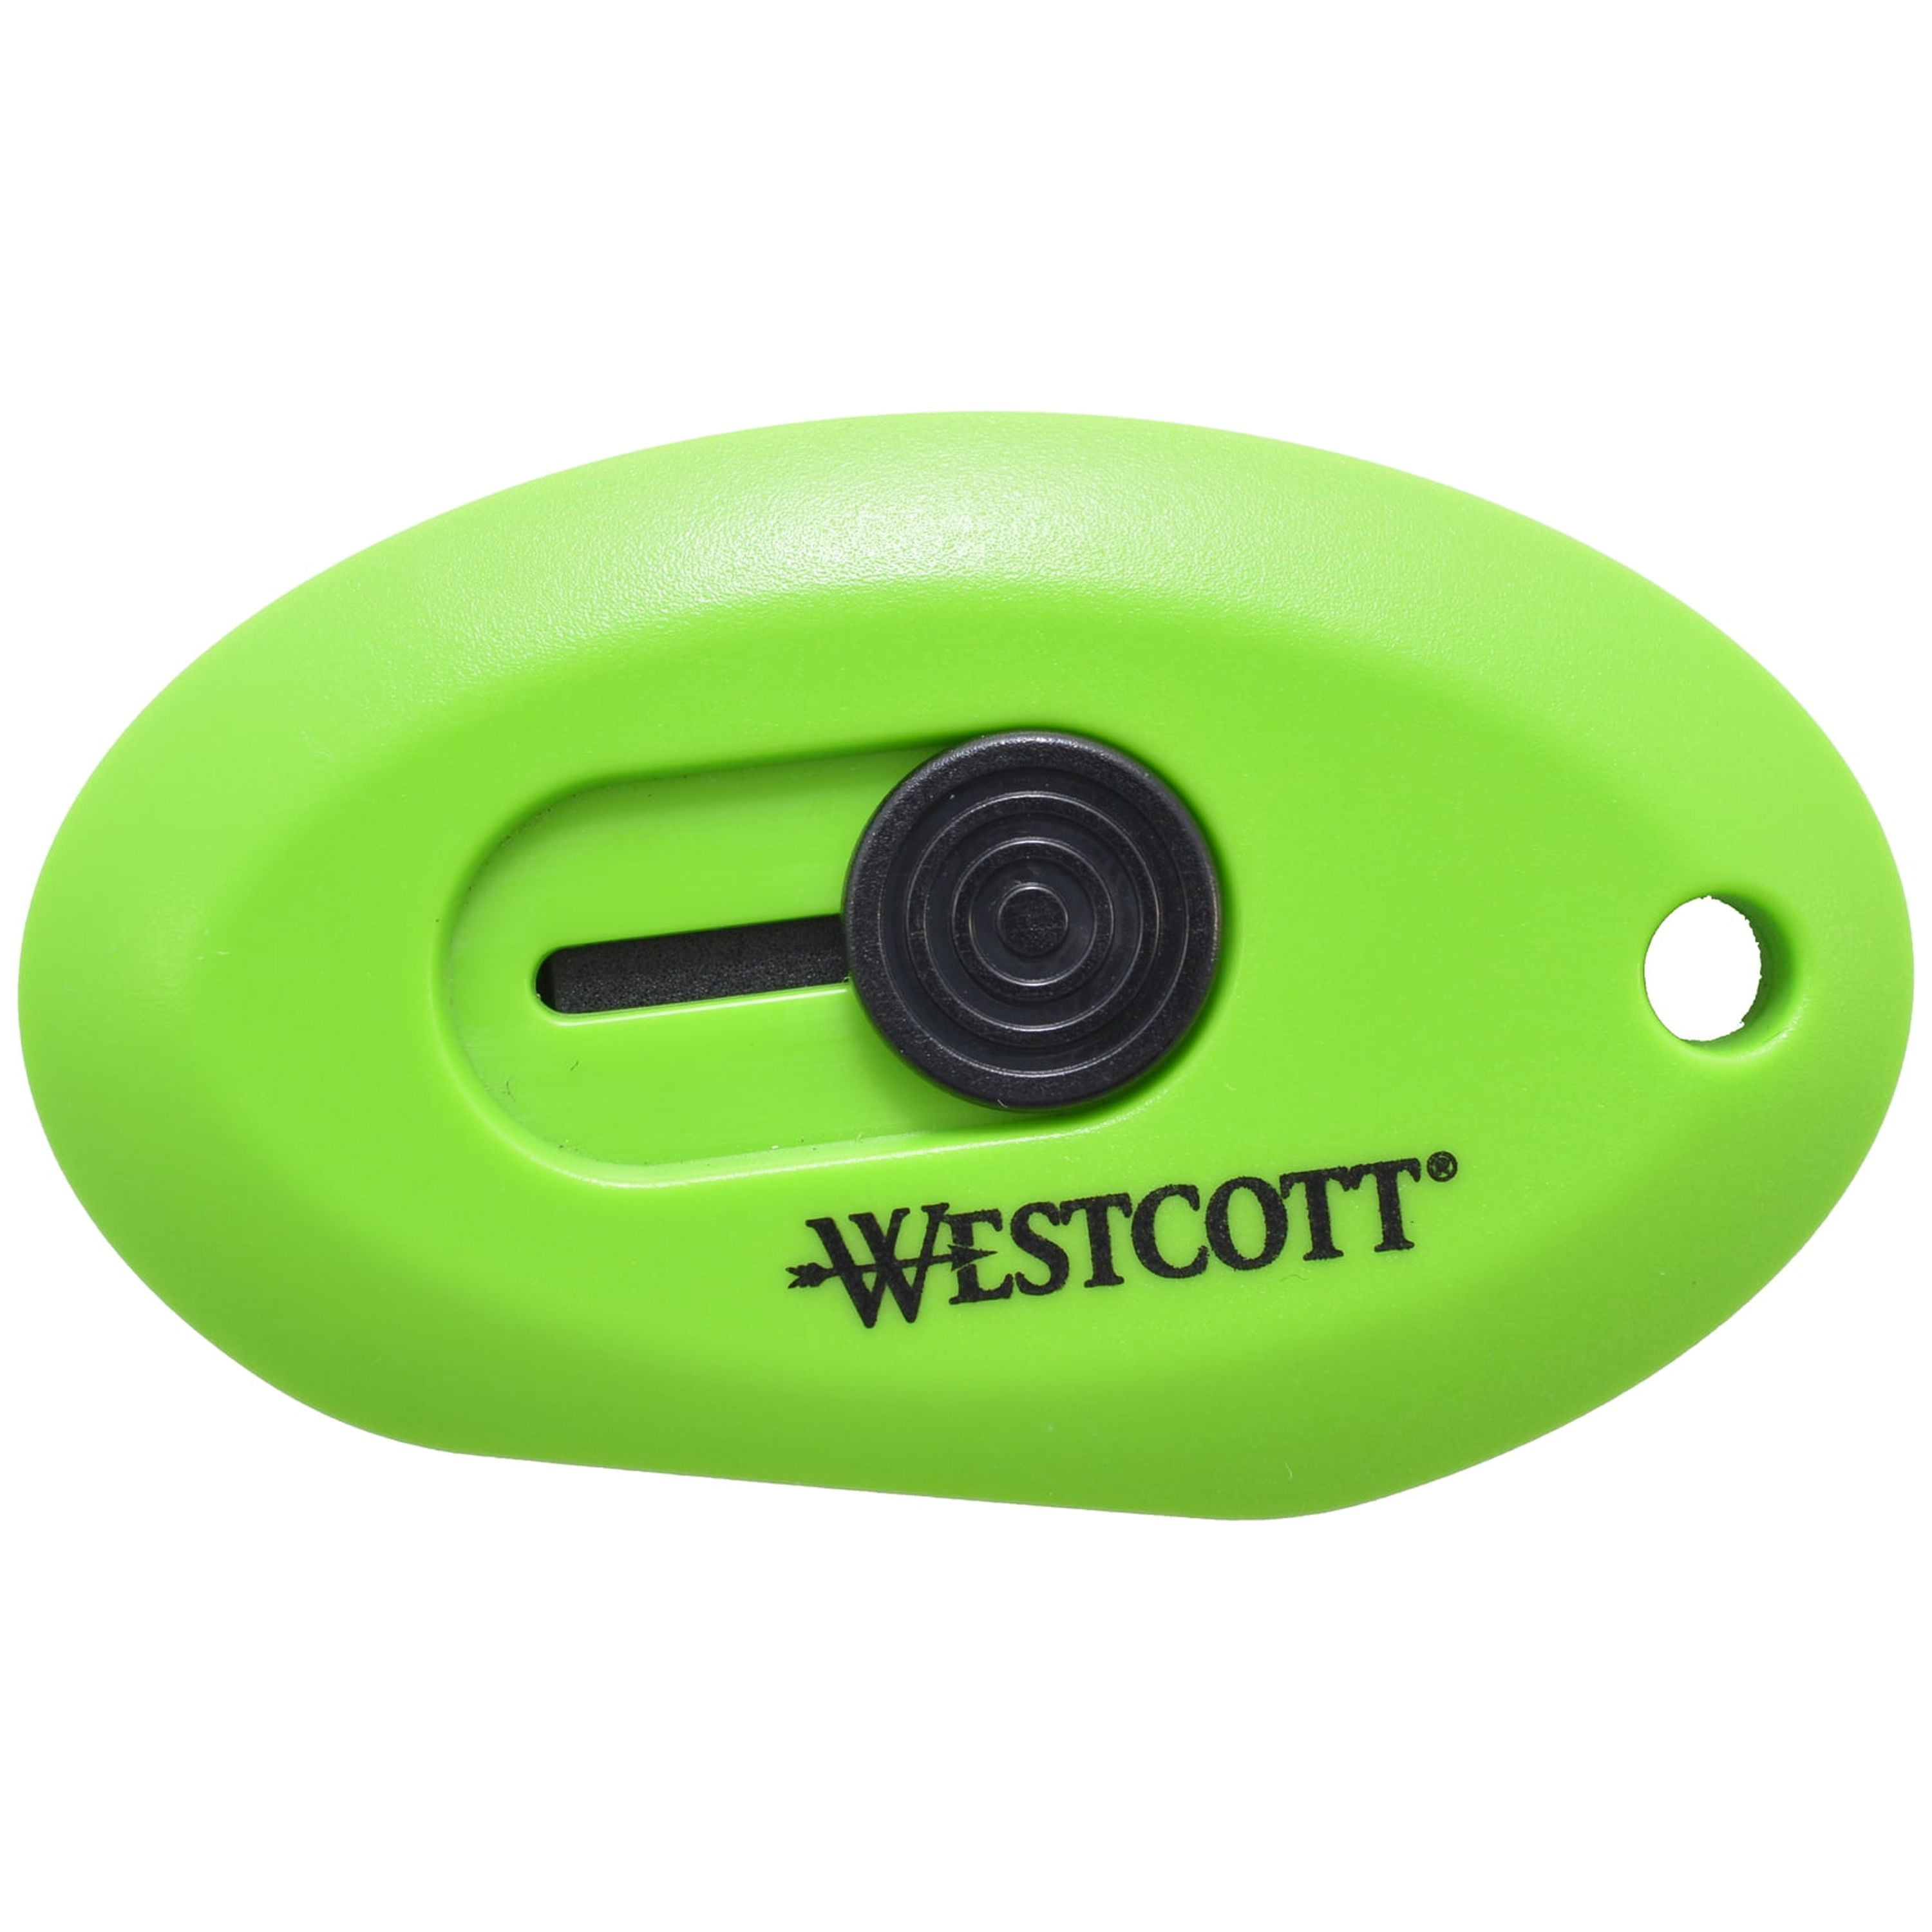 WESTCOTT Compact Retractable Safety Ceramic Box Tool Cutters 